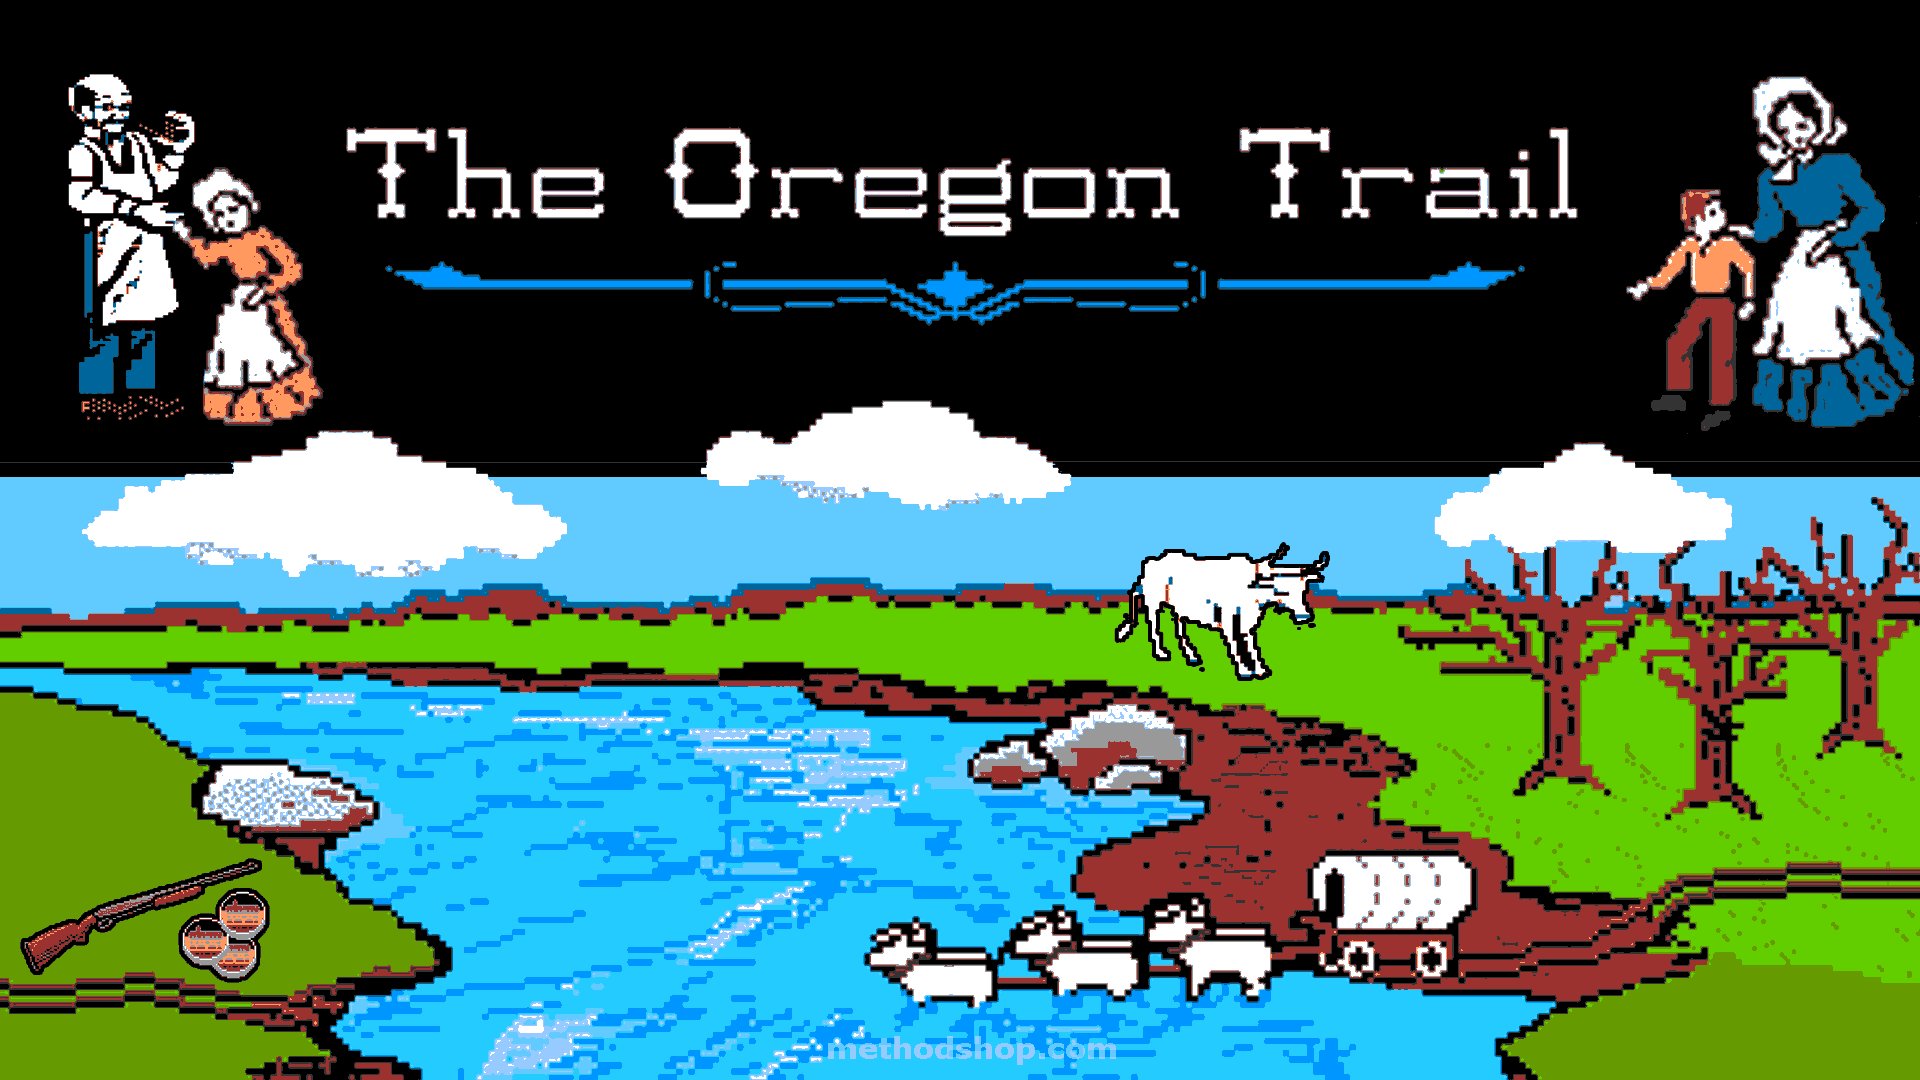 The Oregon Trail, Book by Rinker Buck